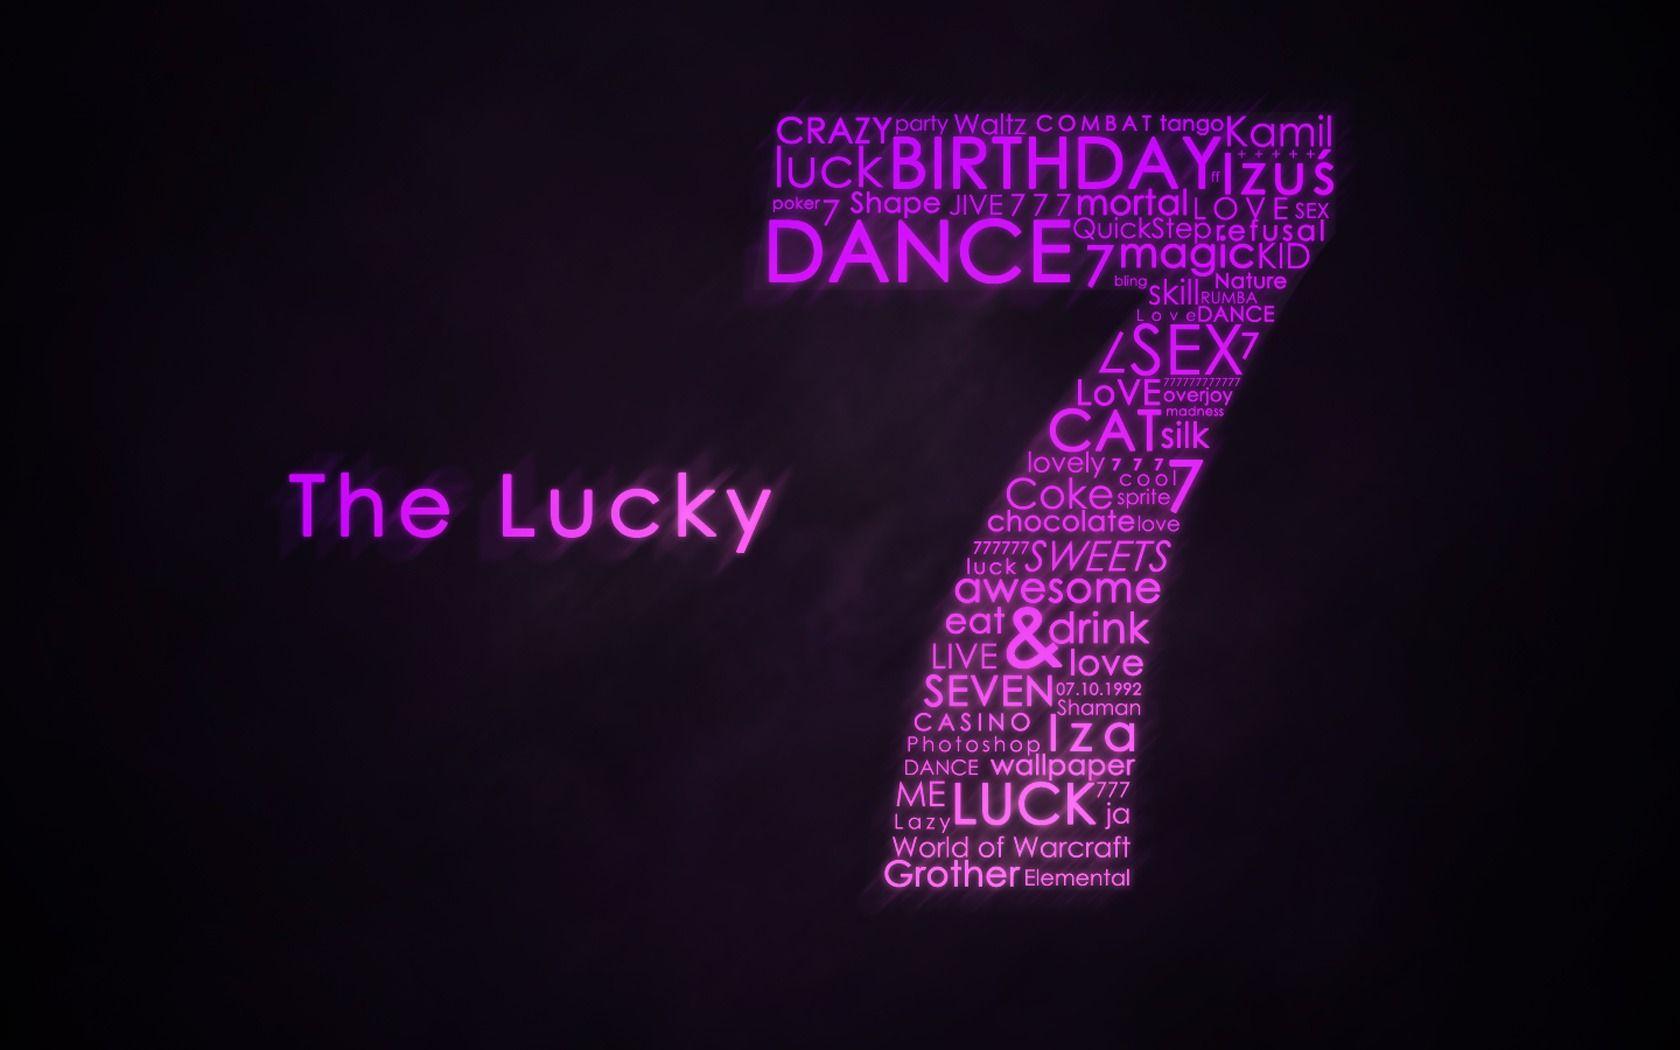 The Lucky SEVEN Wallpaper Miscellaneous Other Wallpaper in jpg